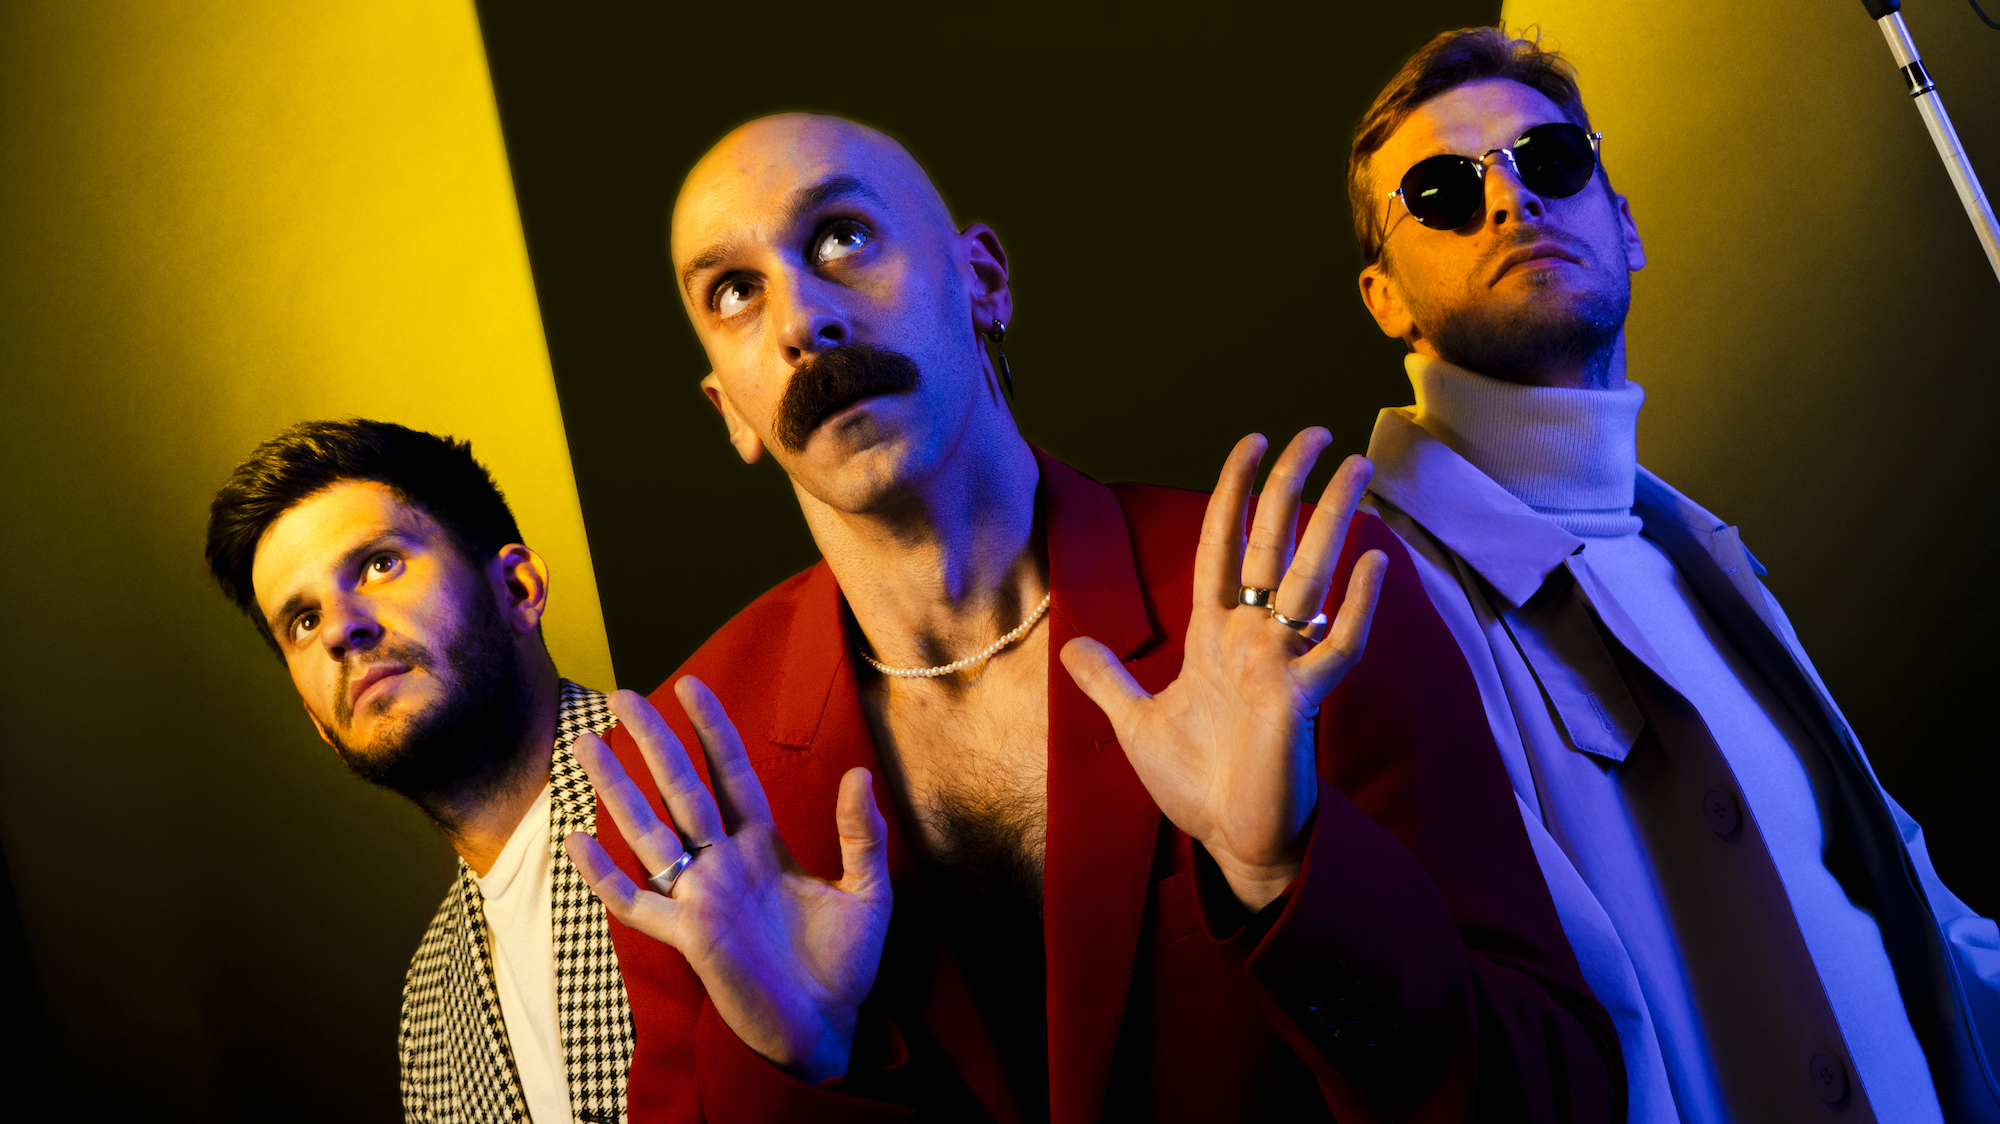 X Ambassadors Face Figments of an Imagination on “My Own Monster”